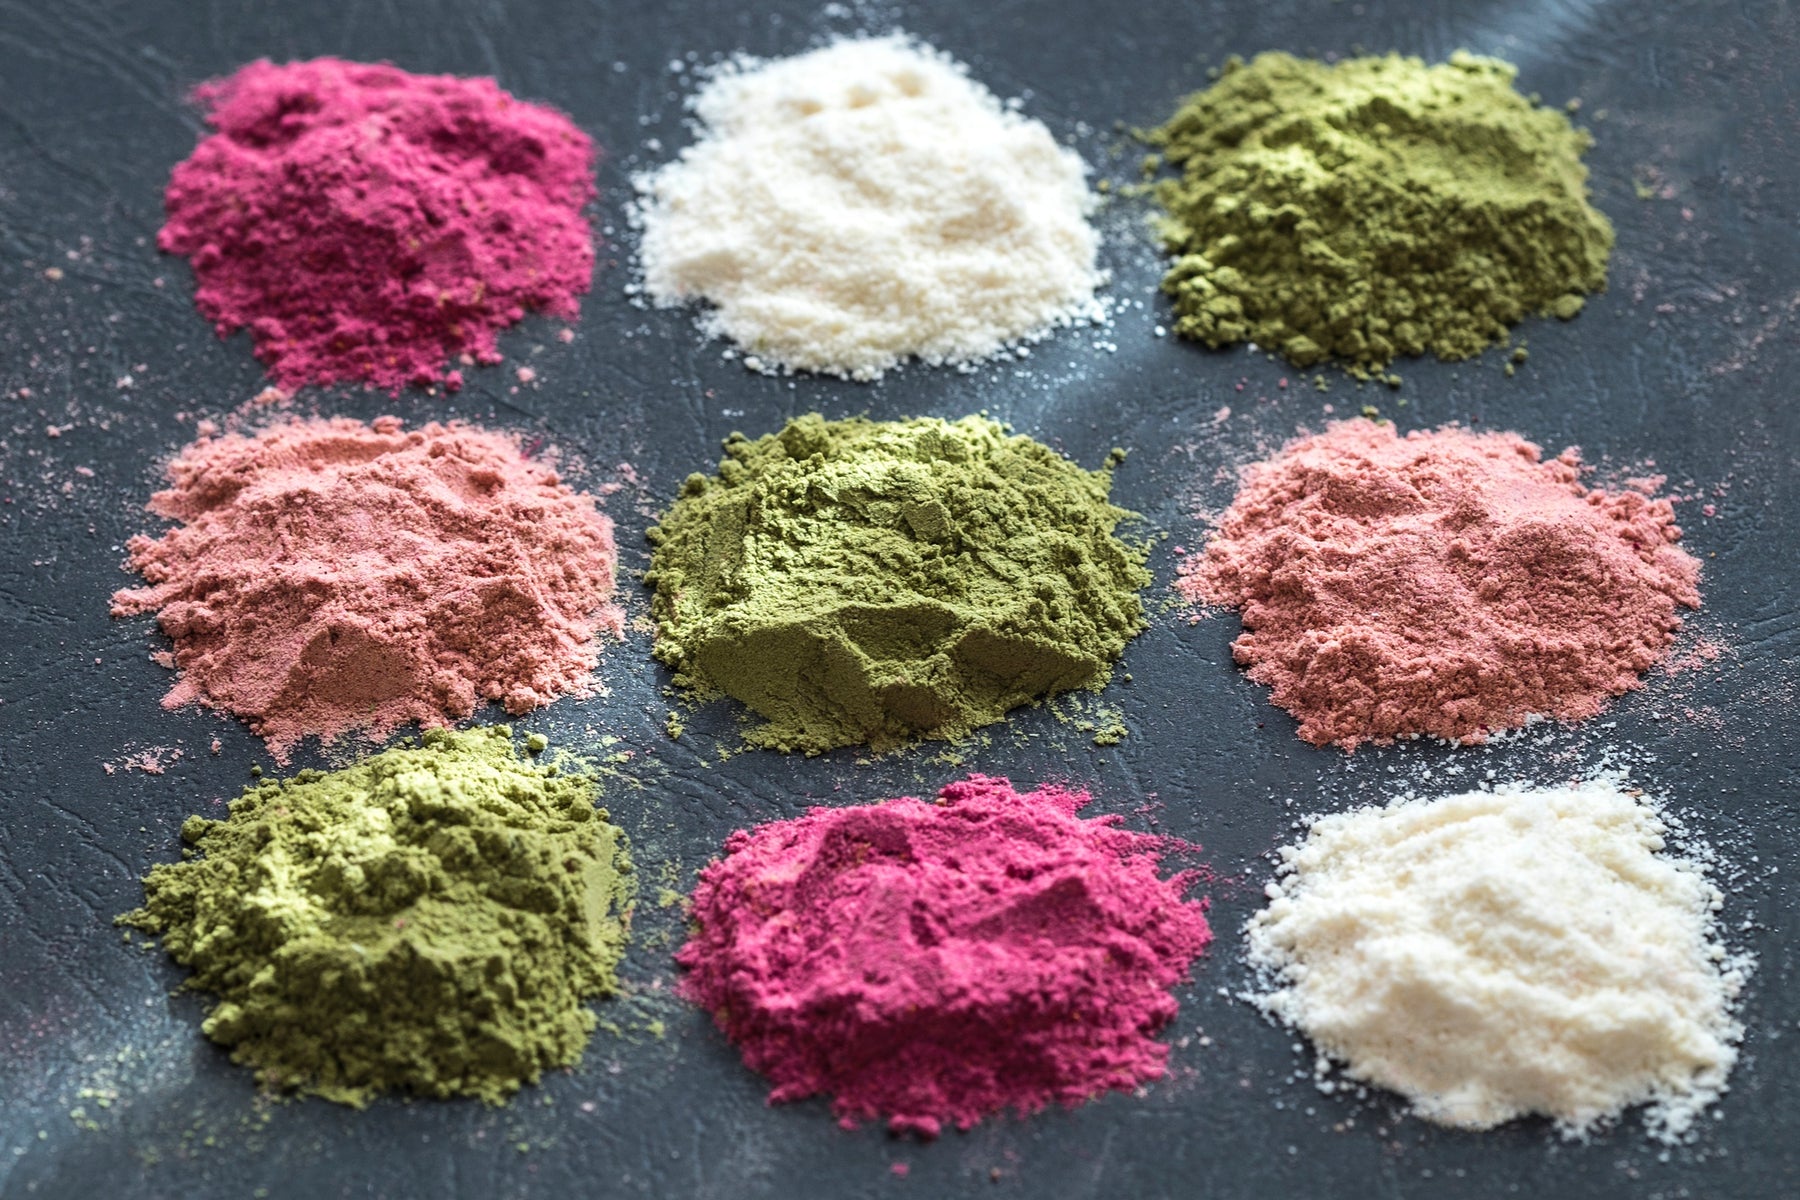 What Are The Benefits Of Superfood Powders? Aside From Deliciousness!